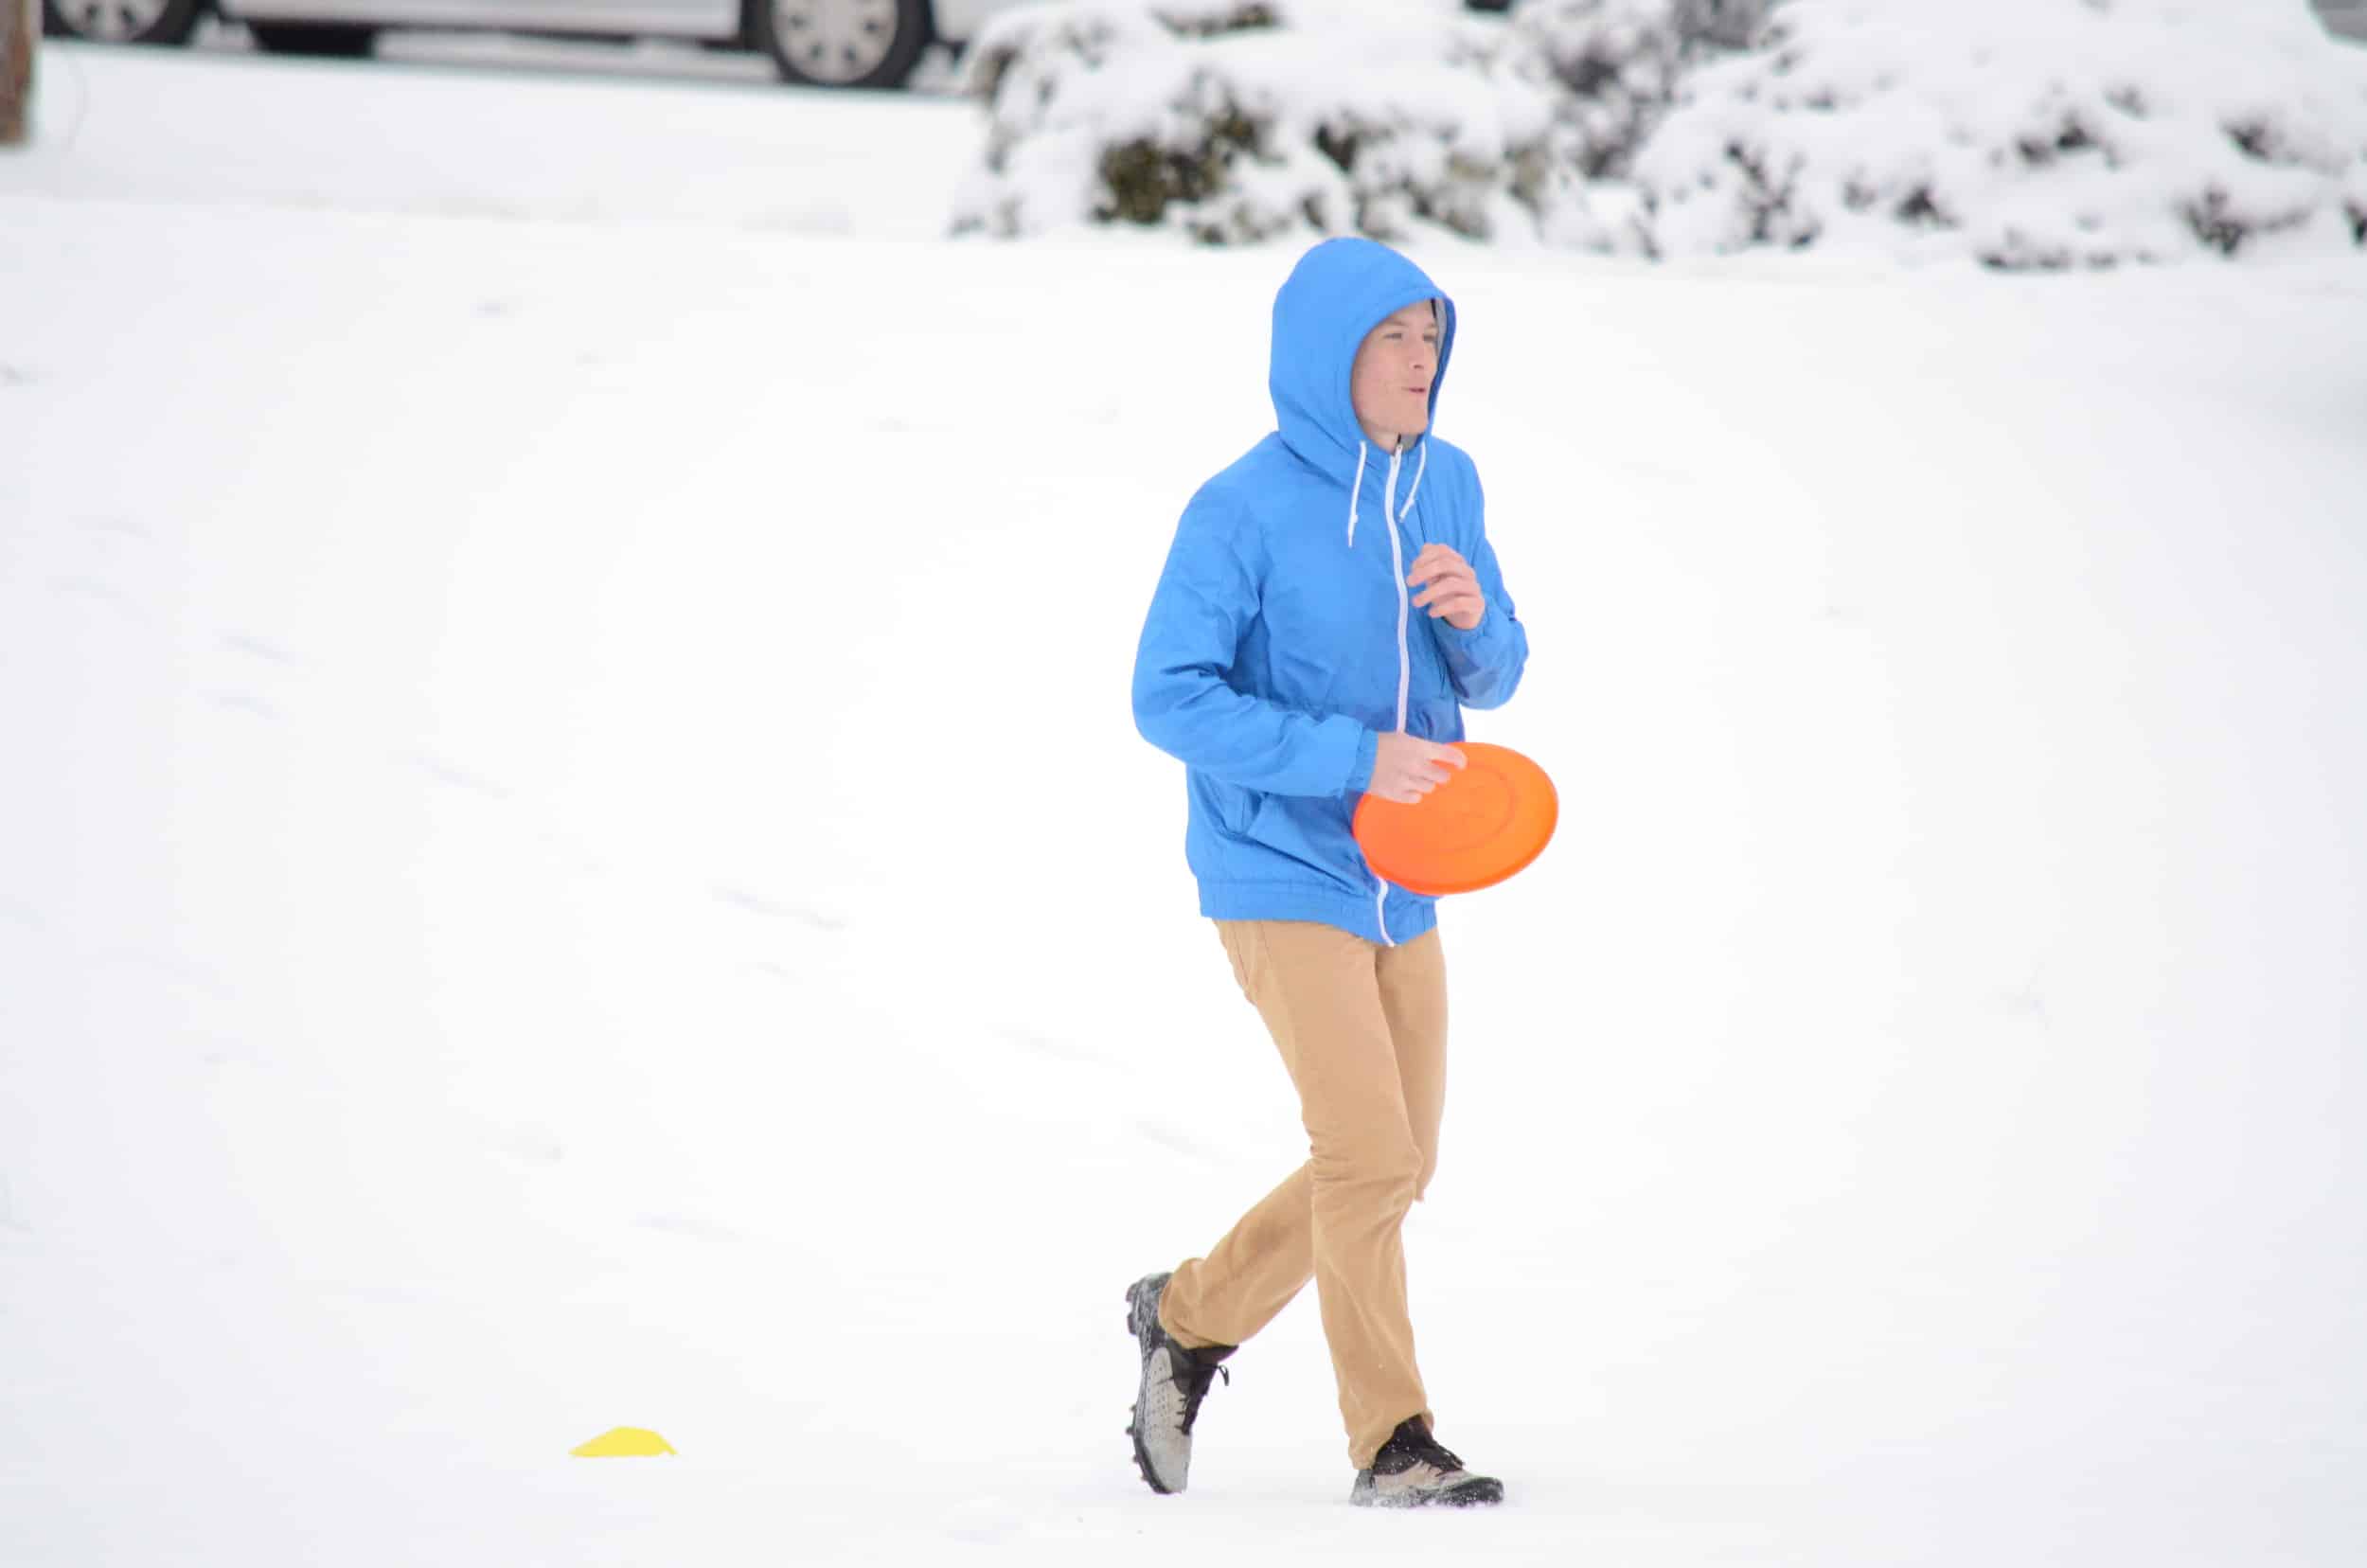 Is Tyler Ezsol really playing Frisbee in this freezing weather?Photo by: Rebecca Meek